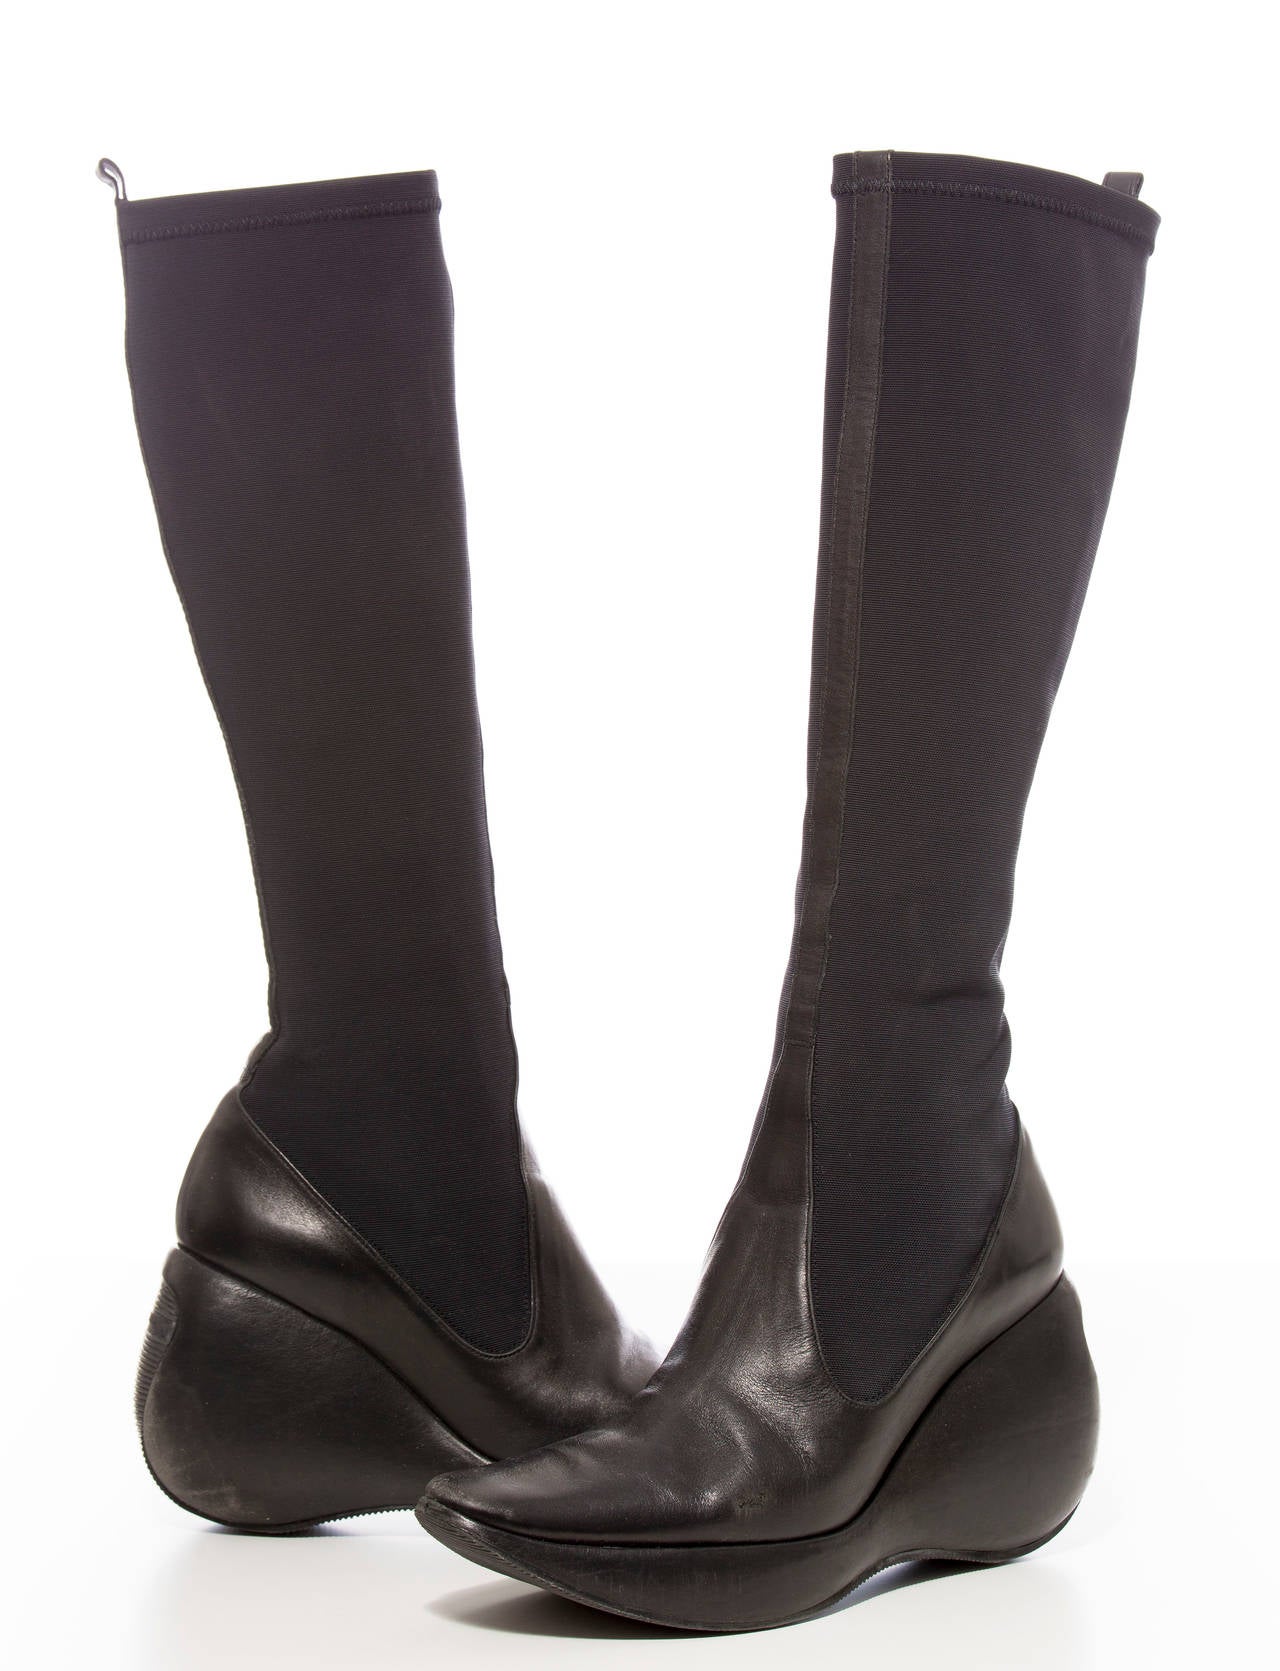 Stephane Kelian stretch nylon and leather boots and comes with original box.